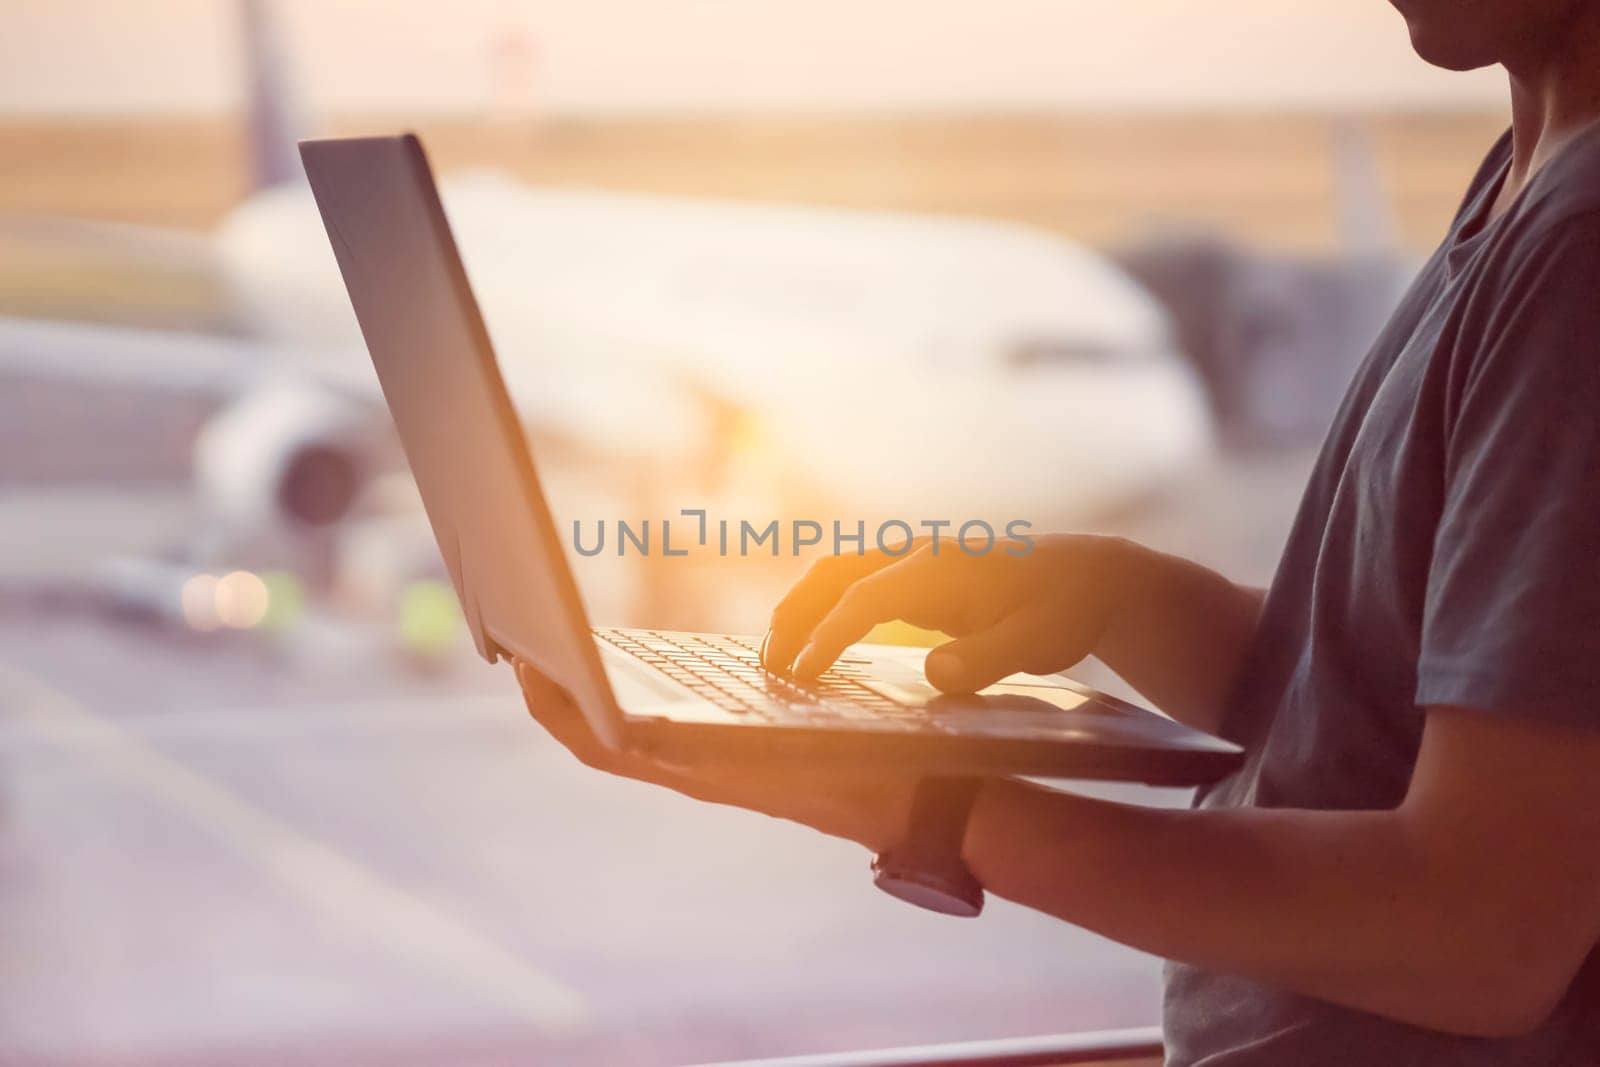 A young man is working on a laptop at the airport while waiting to board the plane. A man is engaged in business, buys tickets, studies and communicates via the Internet at sunset.